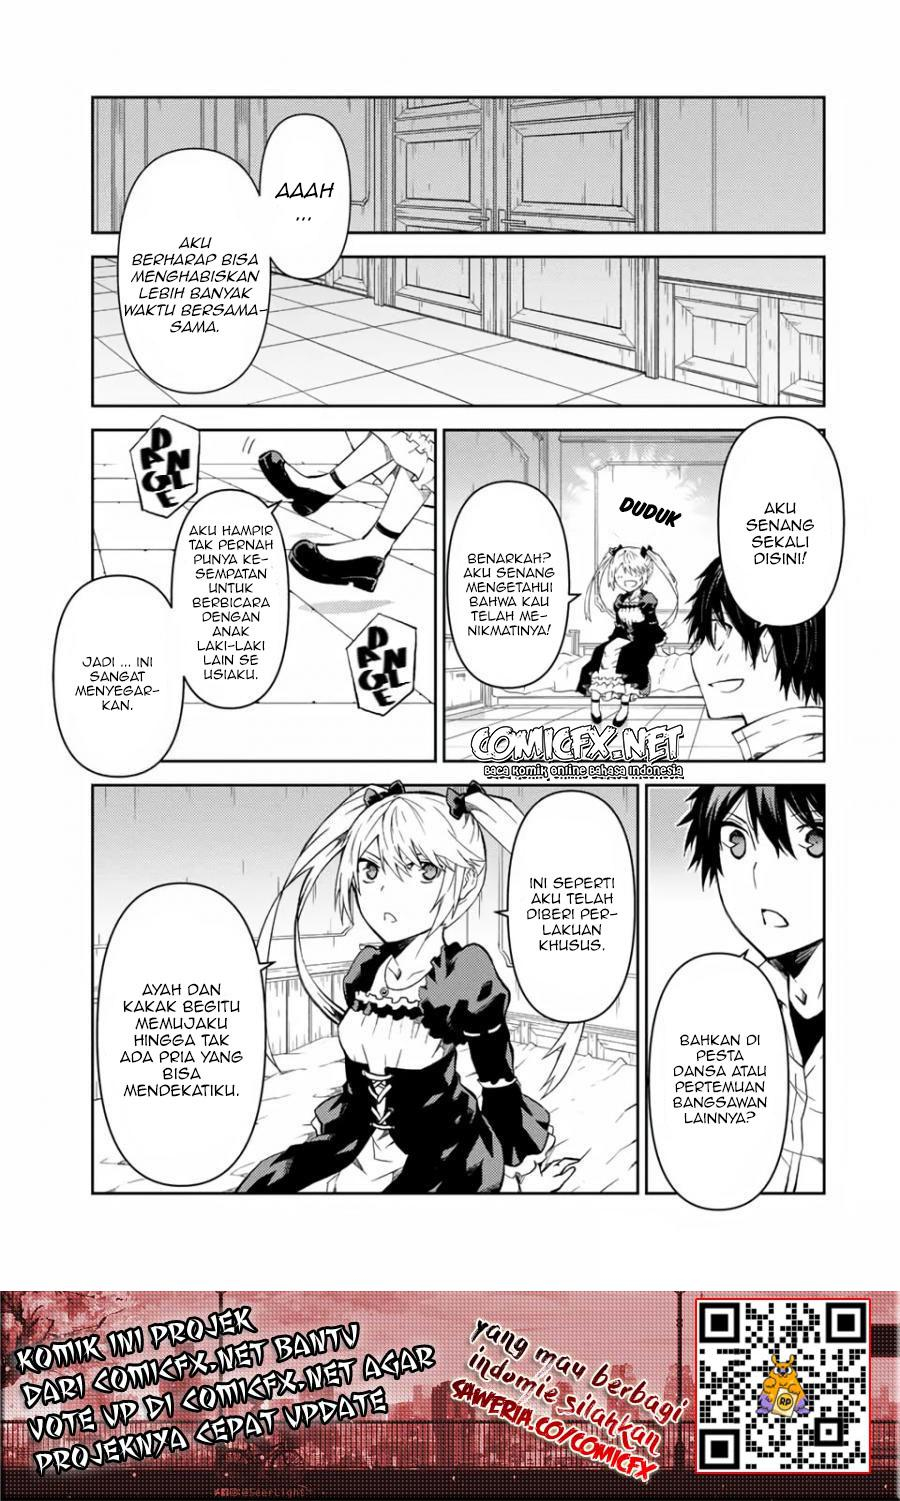 The Weakest Occupation “Blacksmith,” but It’s Actually the Strongest Chapter 20 Bahasa Indonesia